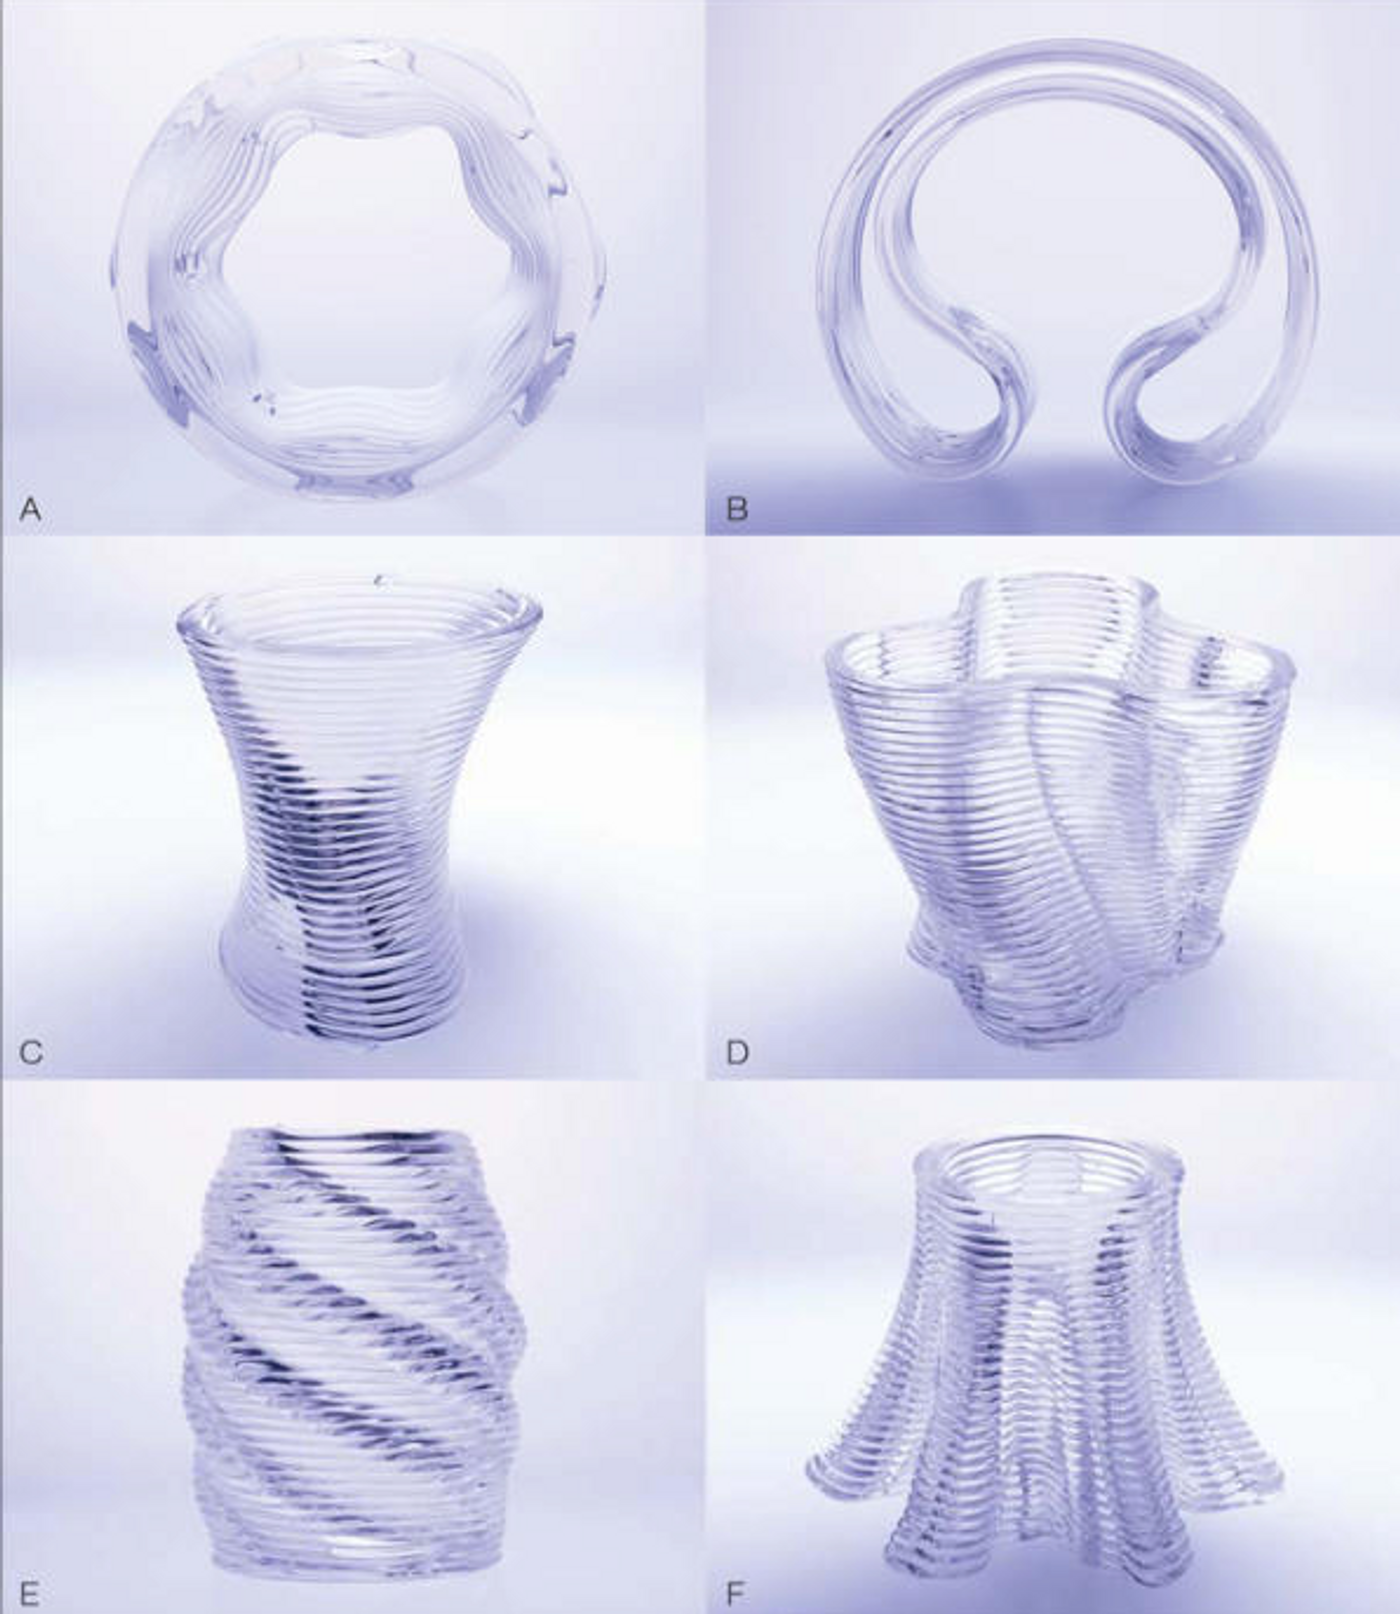 These are some examples of what 3D printed glass sculptures can look like.